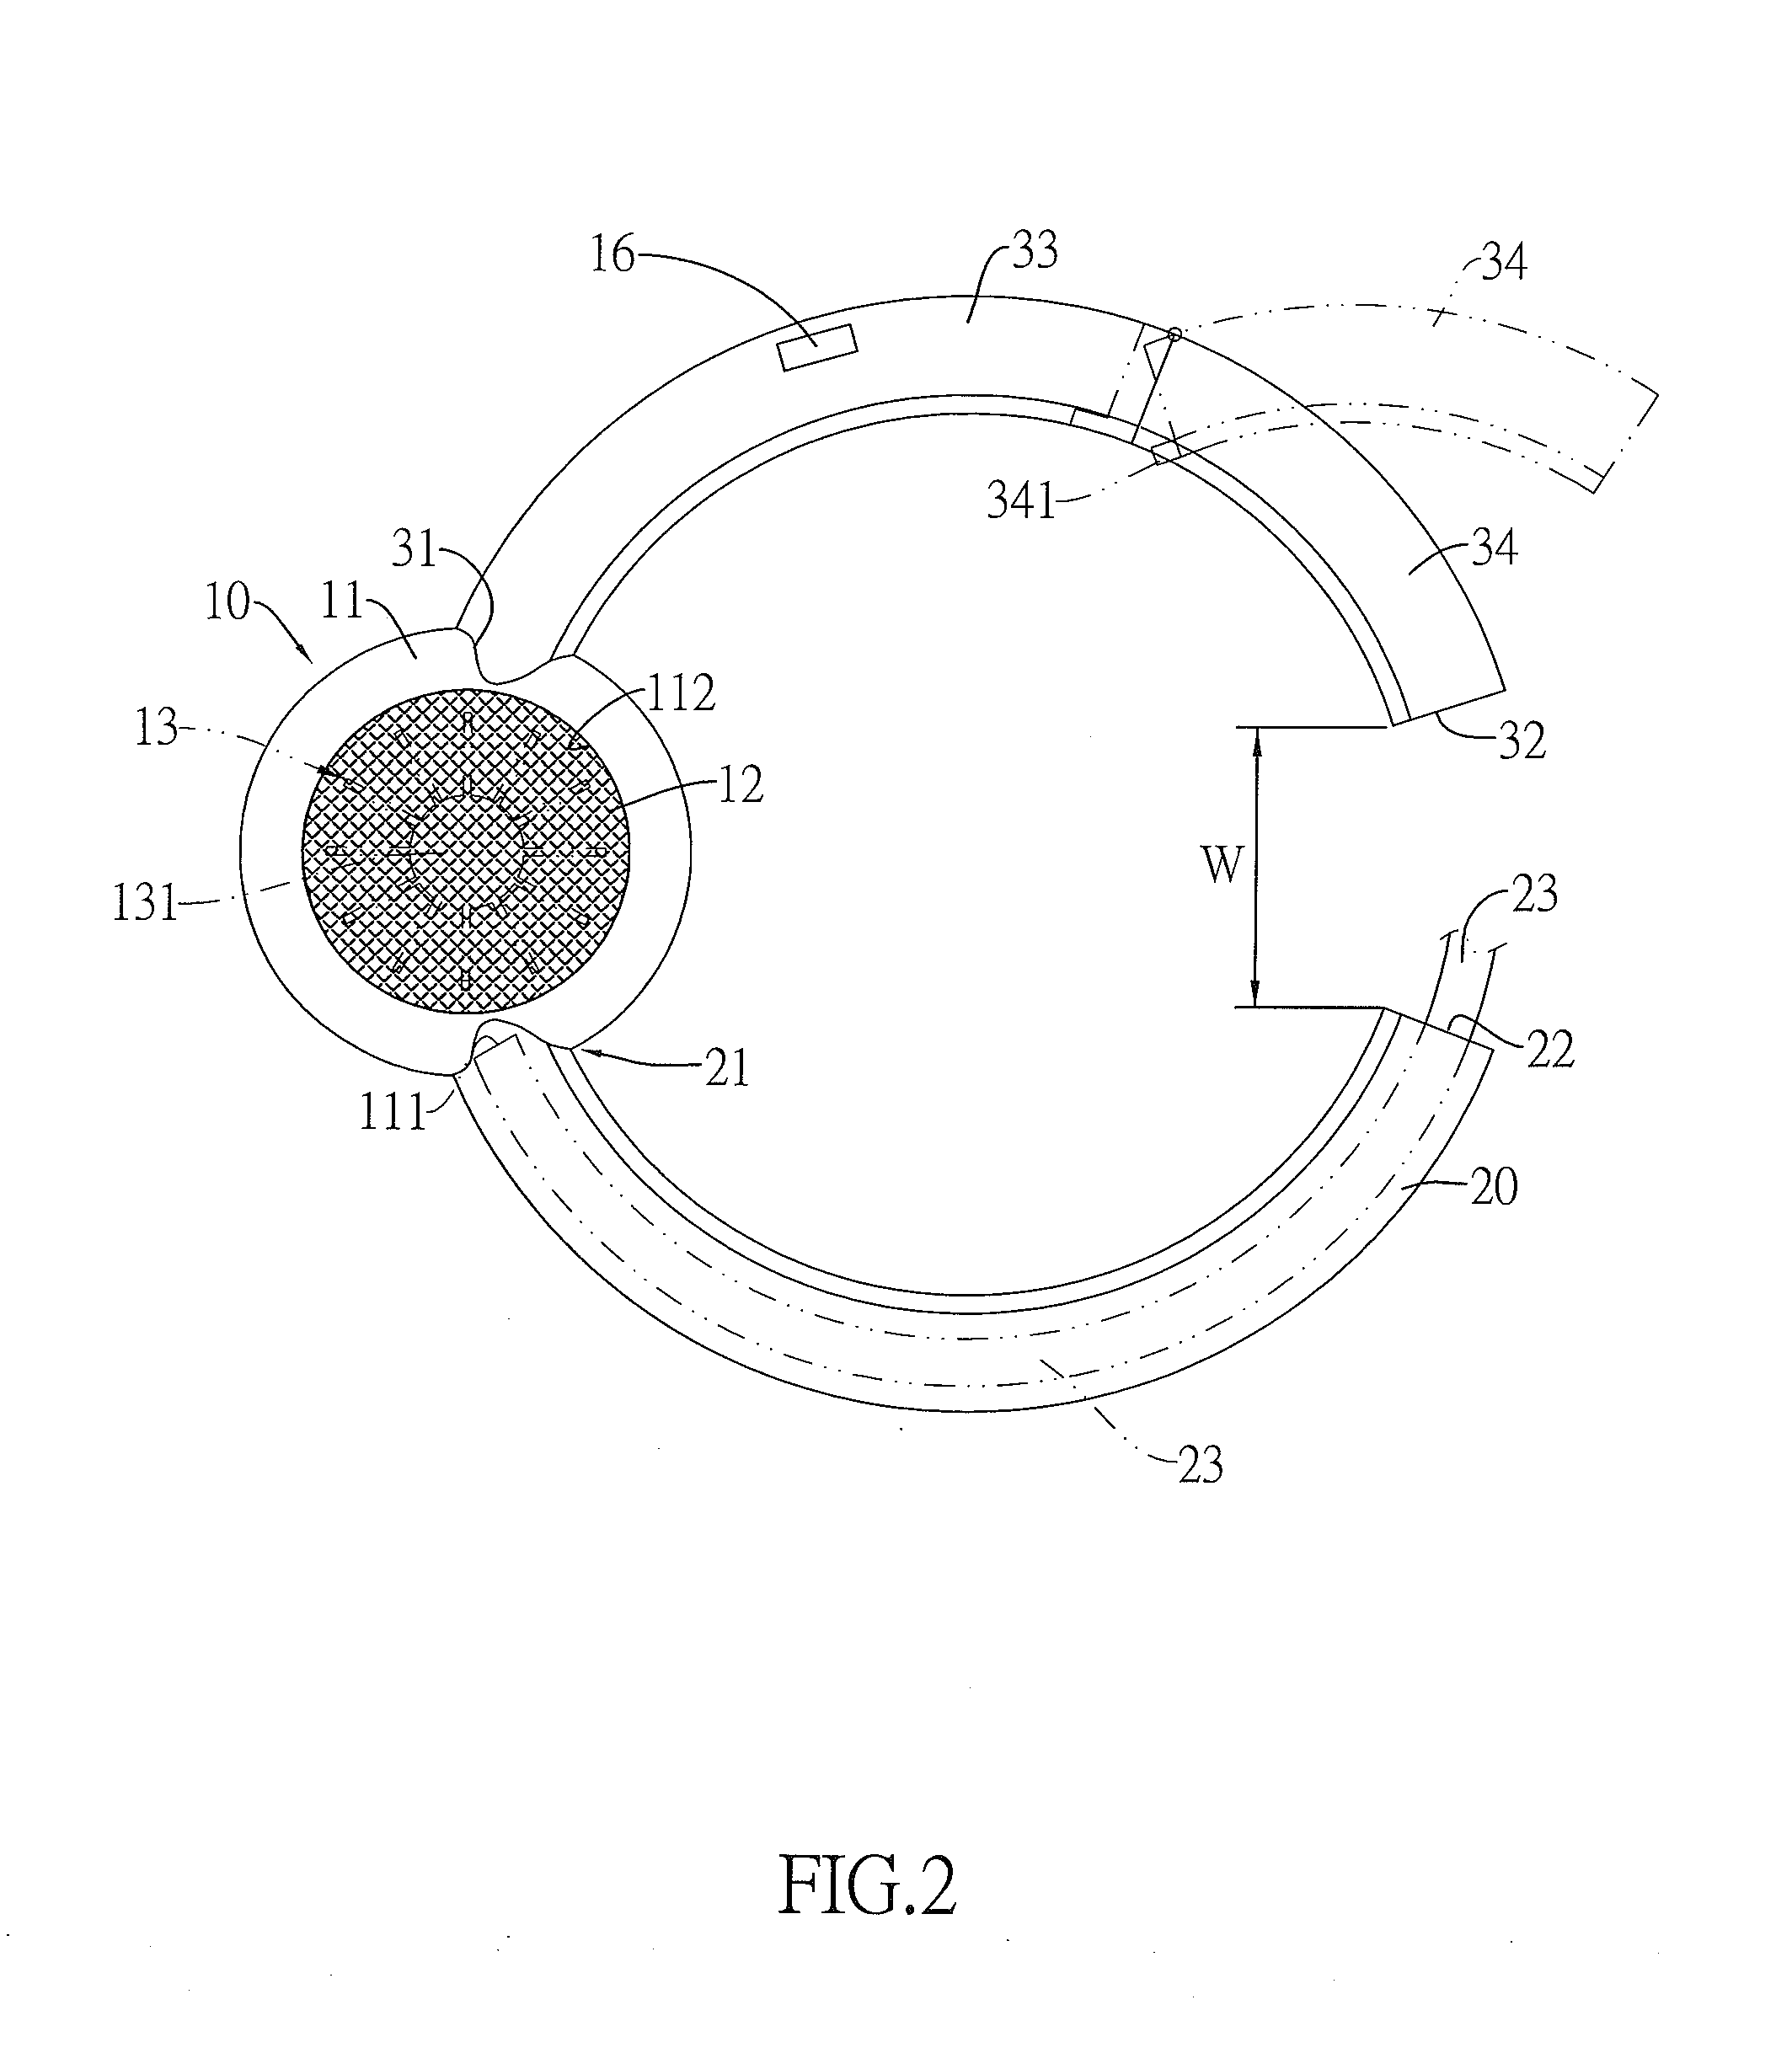 Respiratory Filter Device